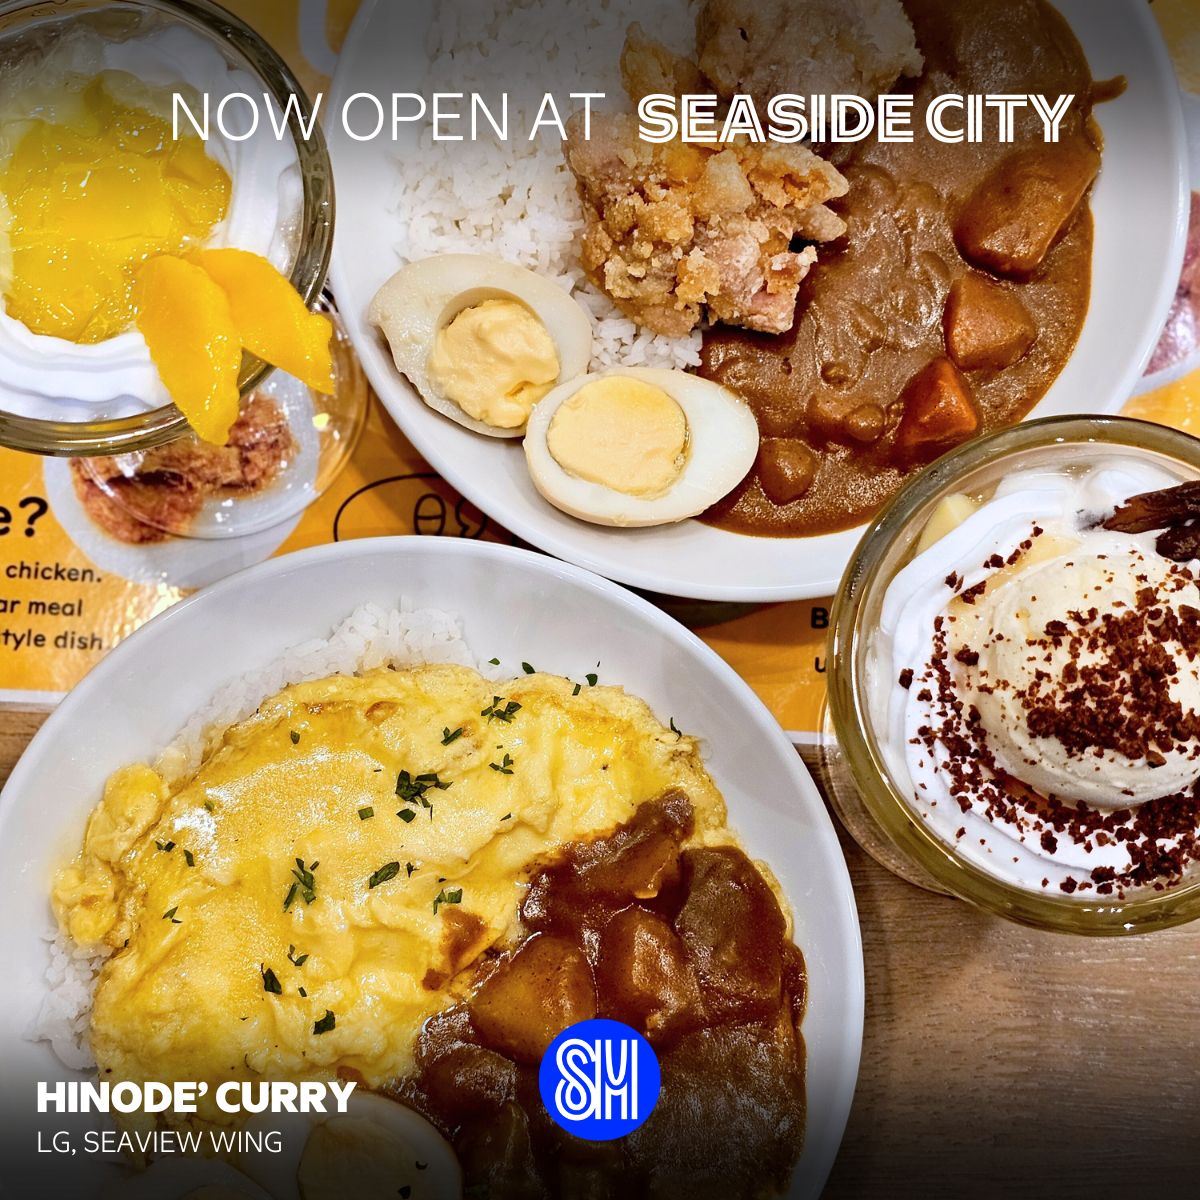 HINODE' CURRY is NOW OPEN! 🤩 Let your taste buds take you to a culinary journey to Japan and experience authentic Japanese curry at Hinode' Curry! Visit them at the Lower Ground Level, Seaview Wing today! 🥢⛩ #EverythingsHereAtSM #AWorldOfExperienceAtSM